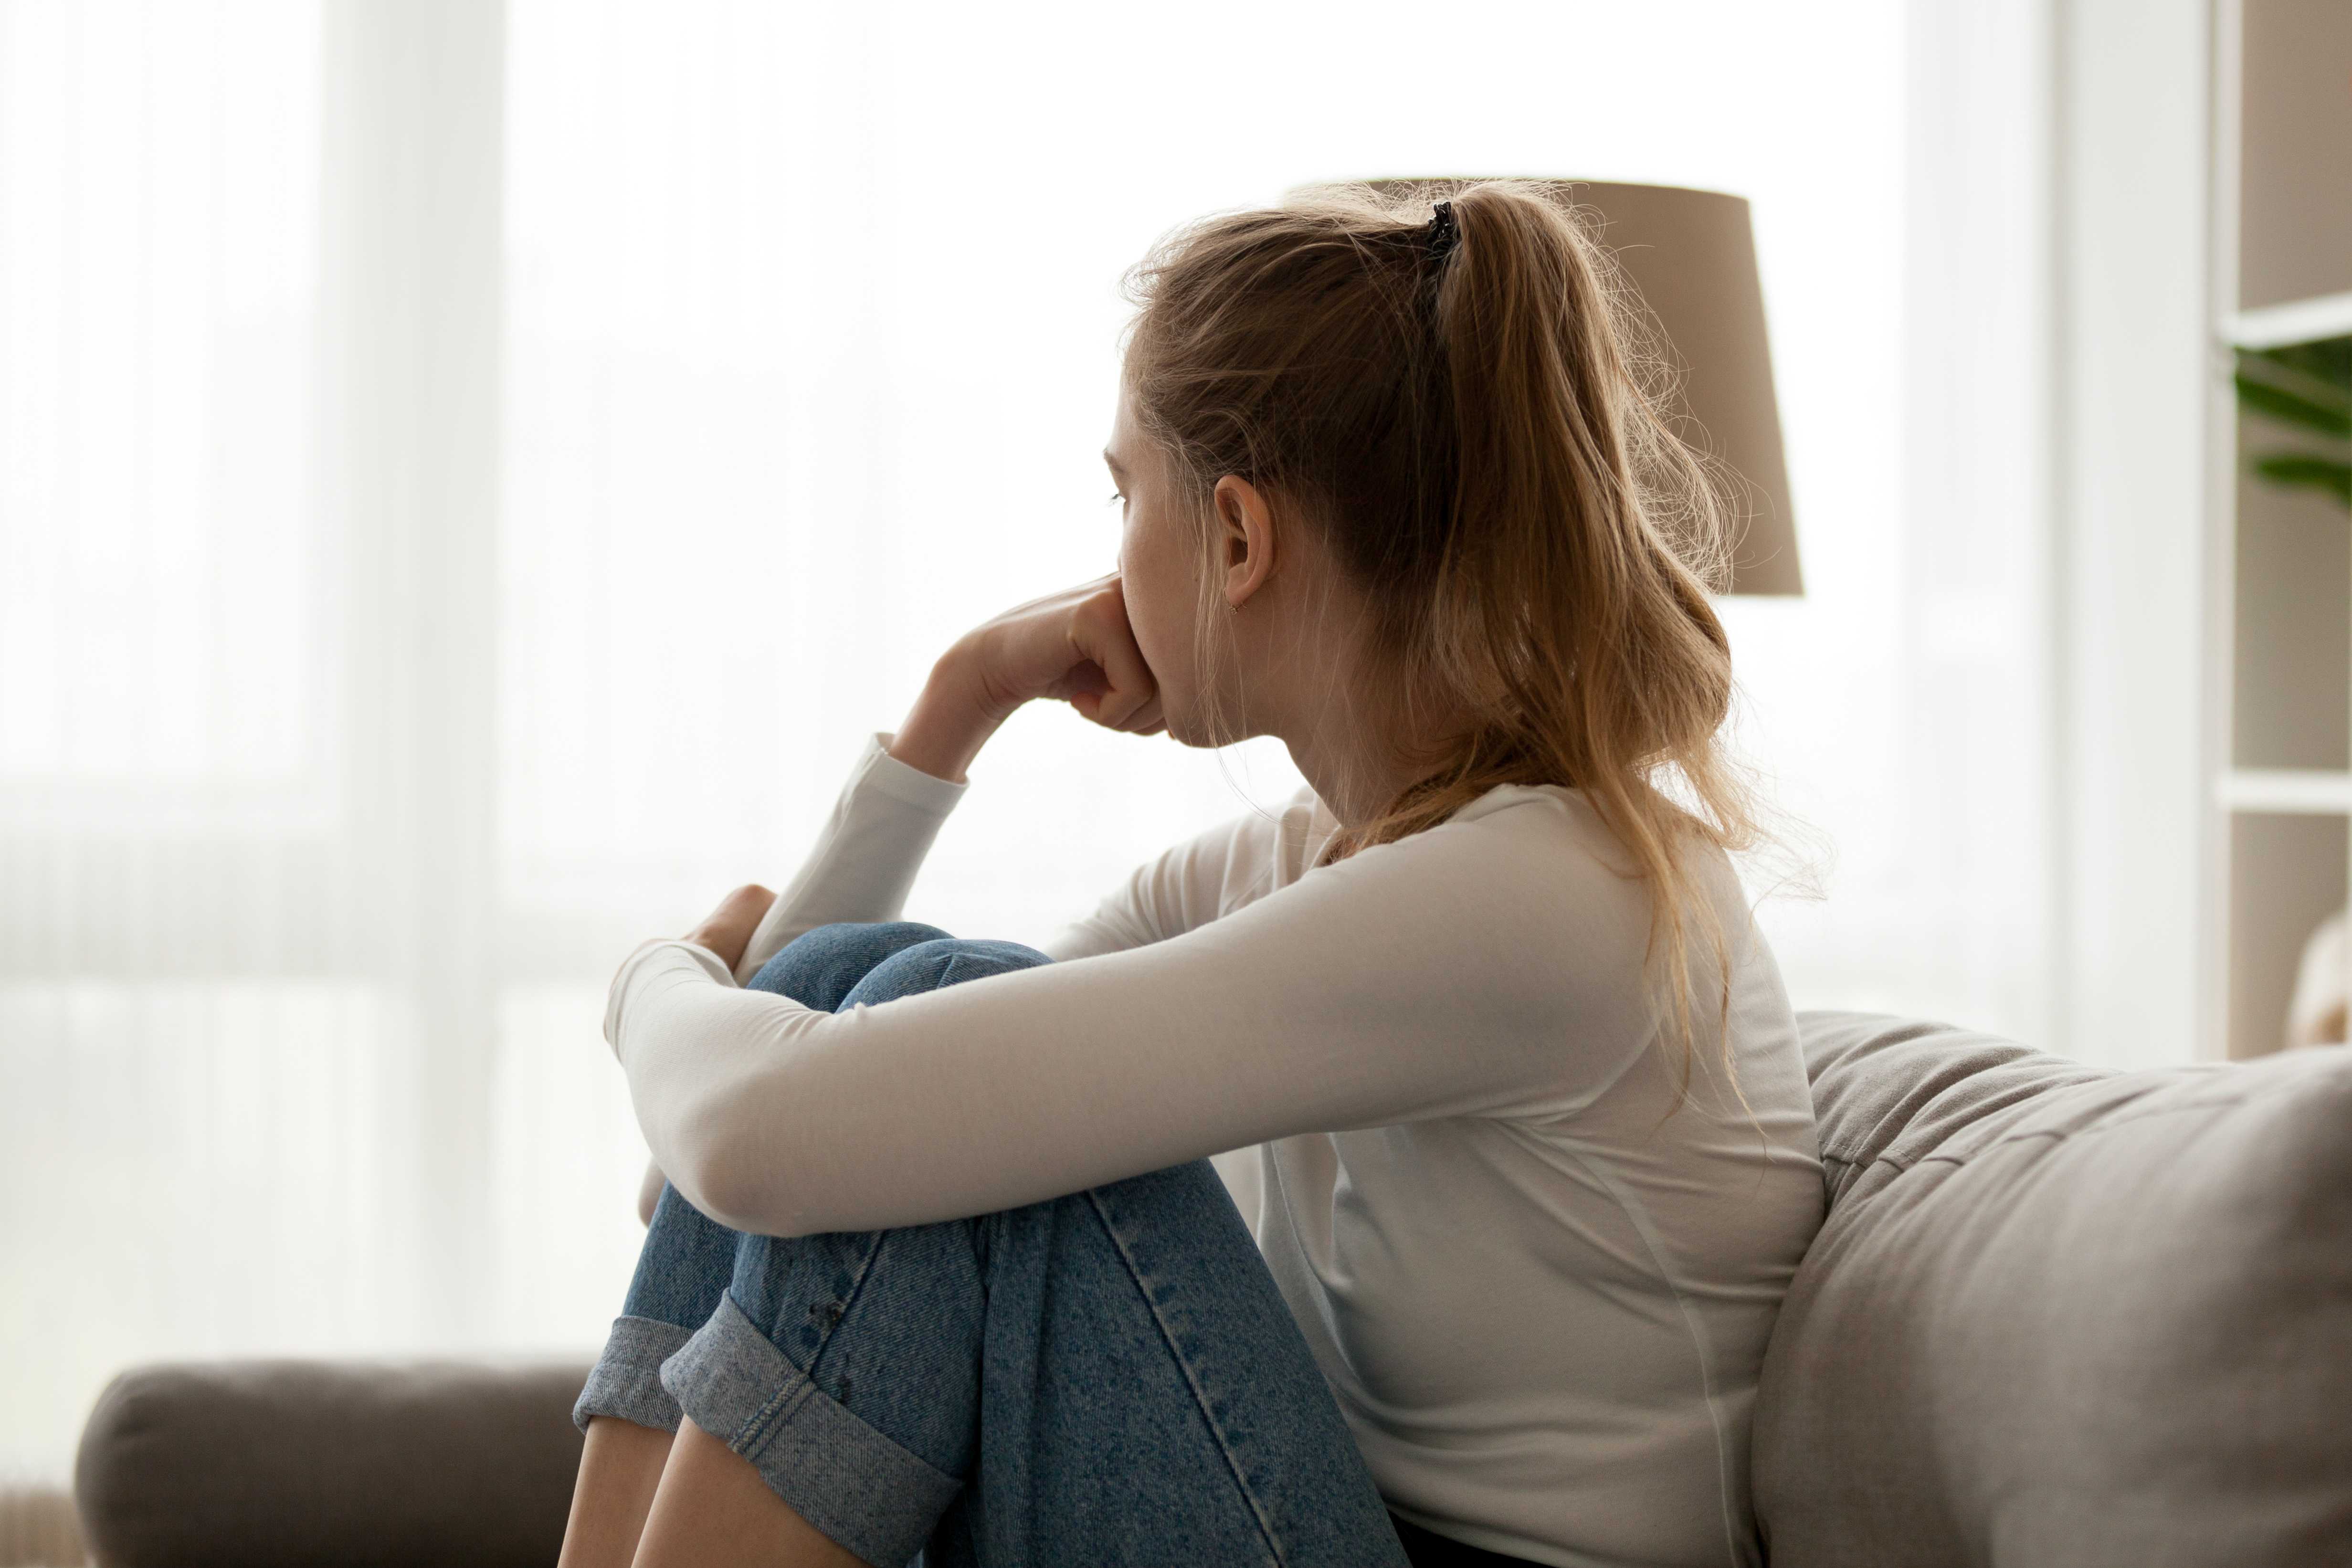 A young woman looking sad | Source: Shutterstock